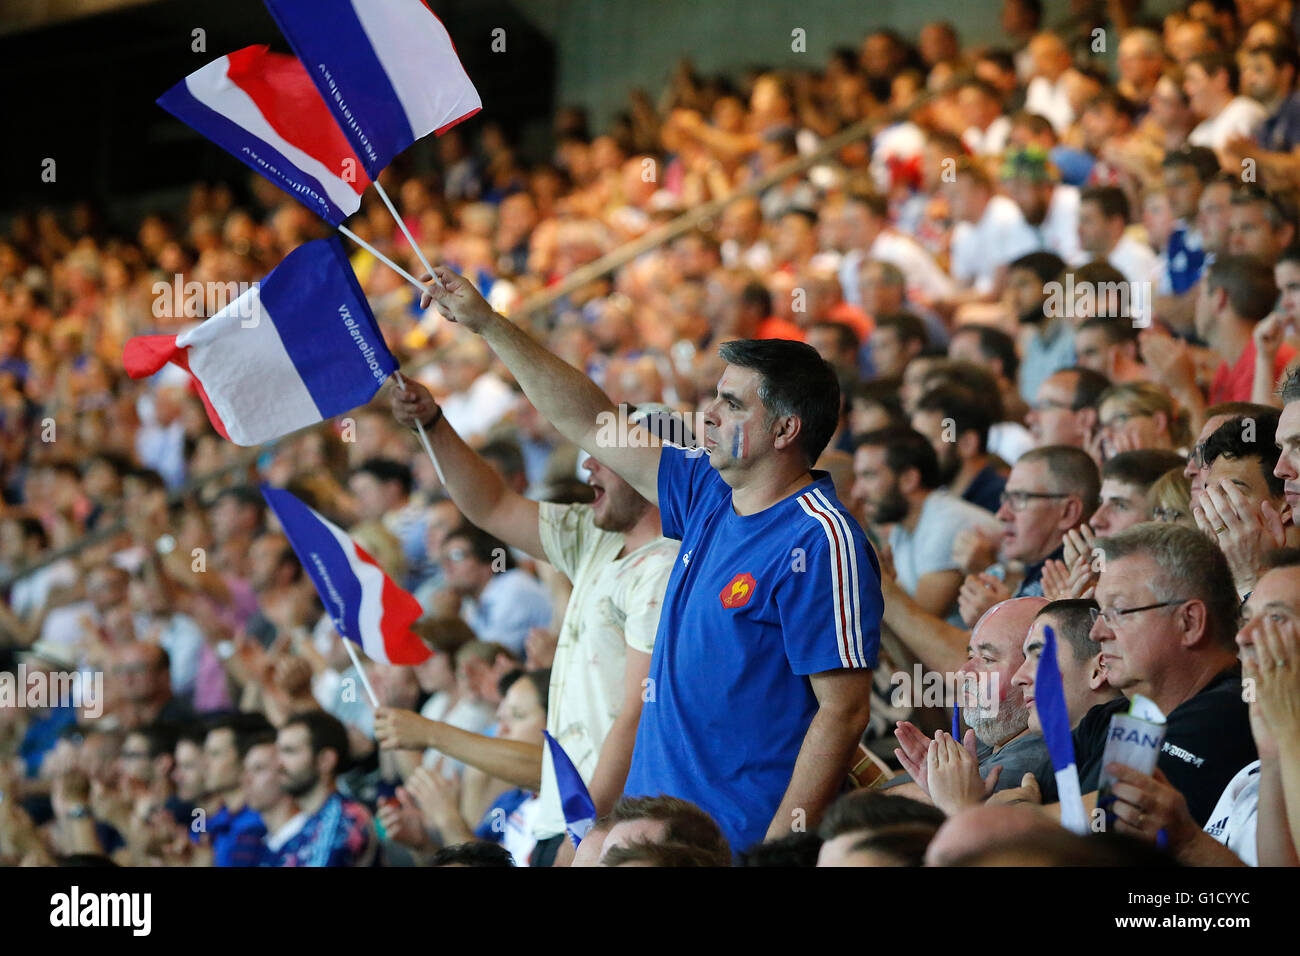 Rugby match at the Stade de France. French spectators. Saint-Denis. France. Stock Photo